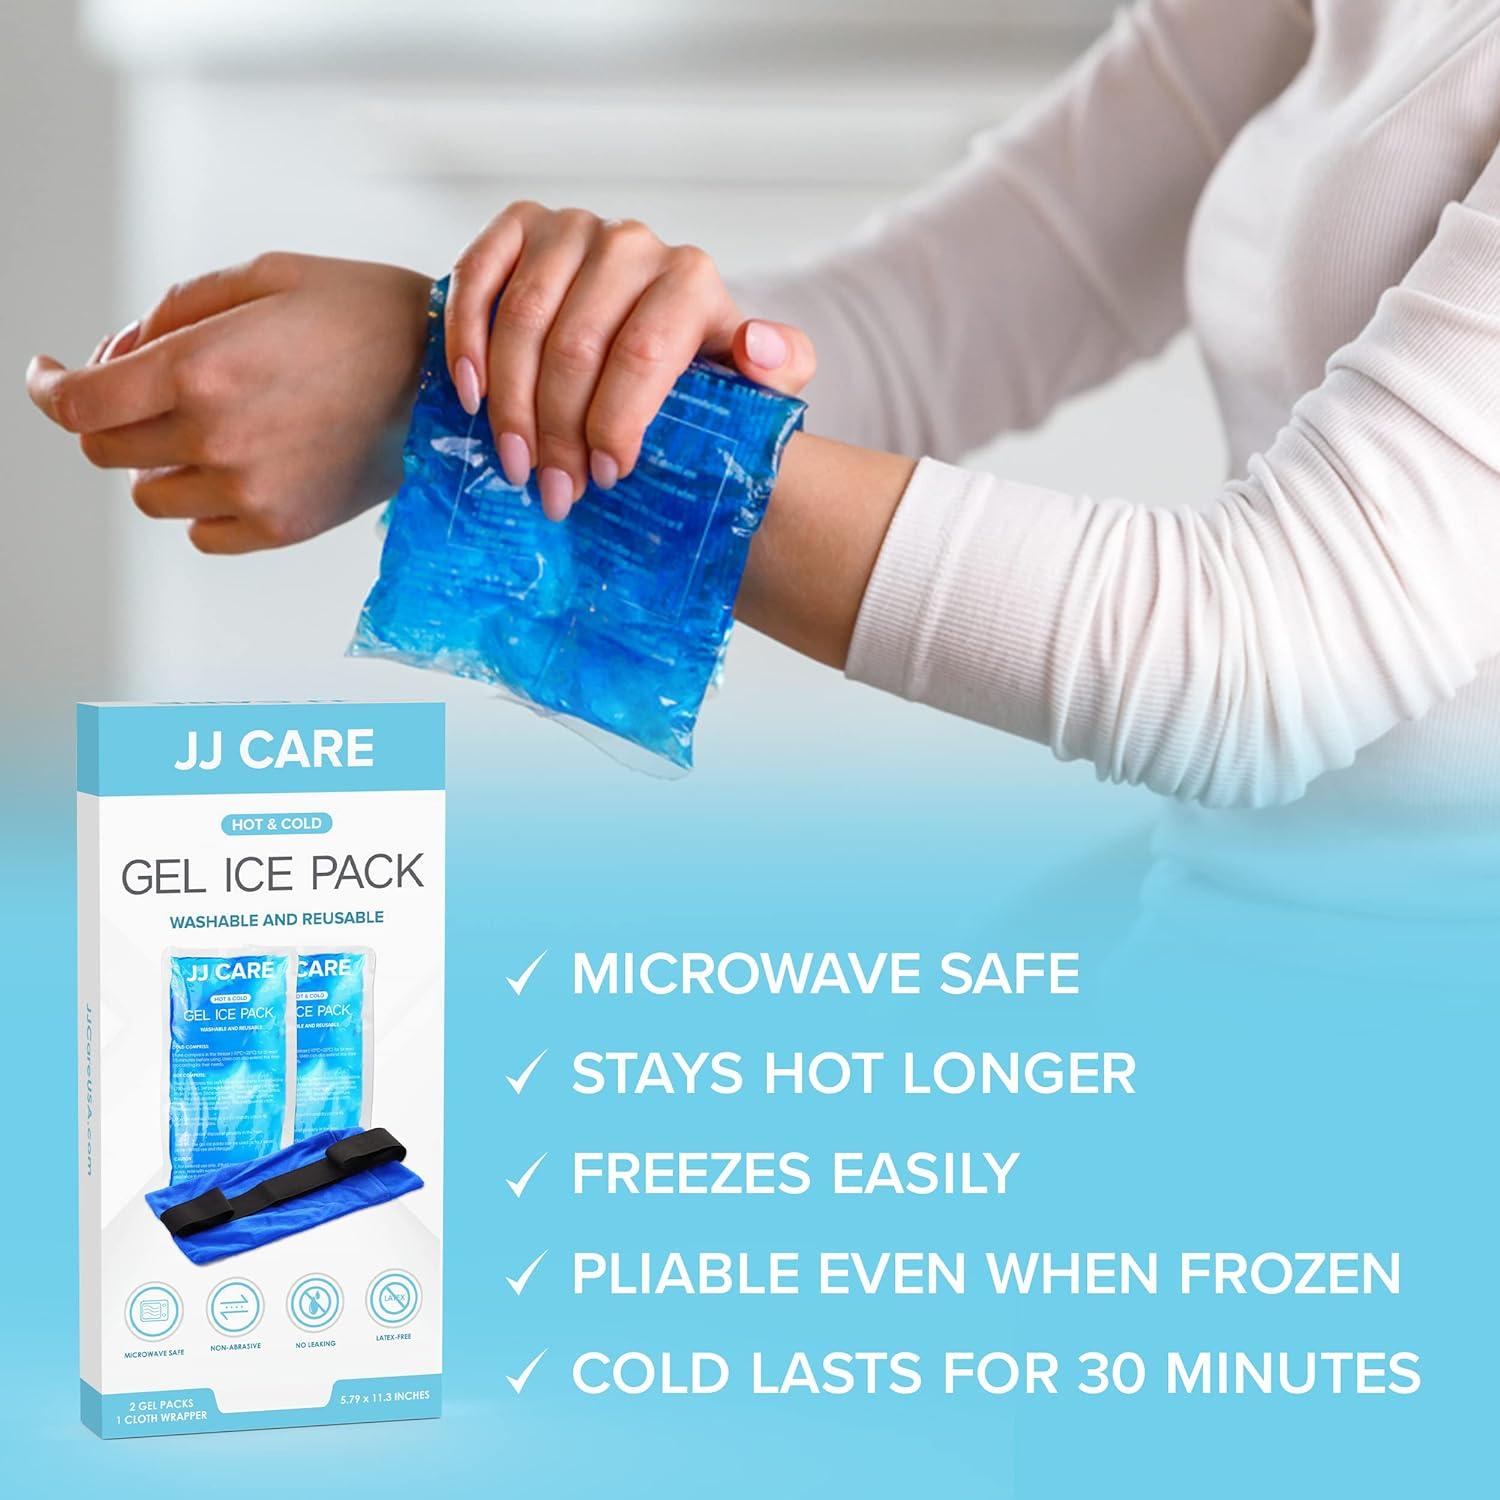 JJ CARE Gel Ice Packs - Pack of 2 Reusable Ice Pack for Injuries